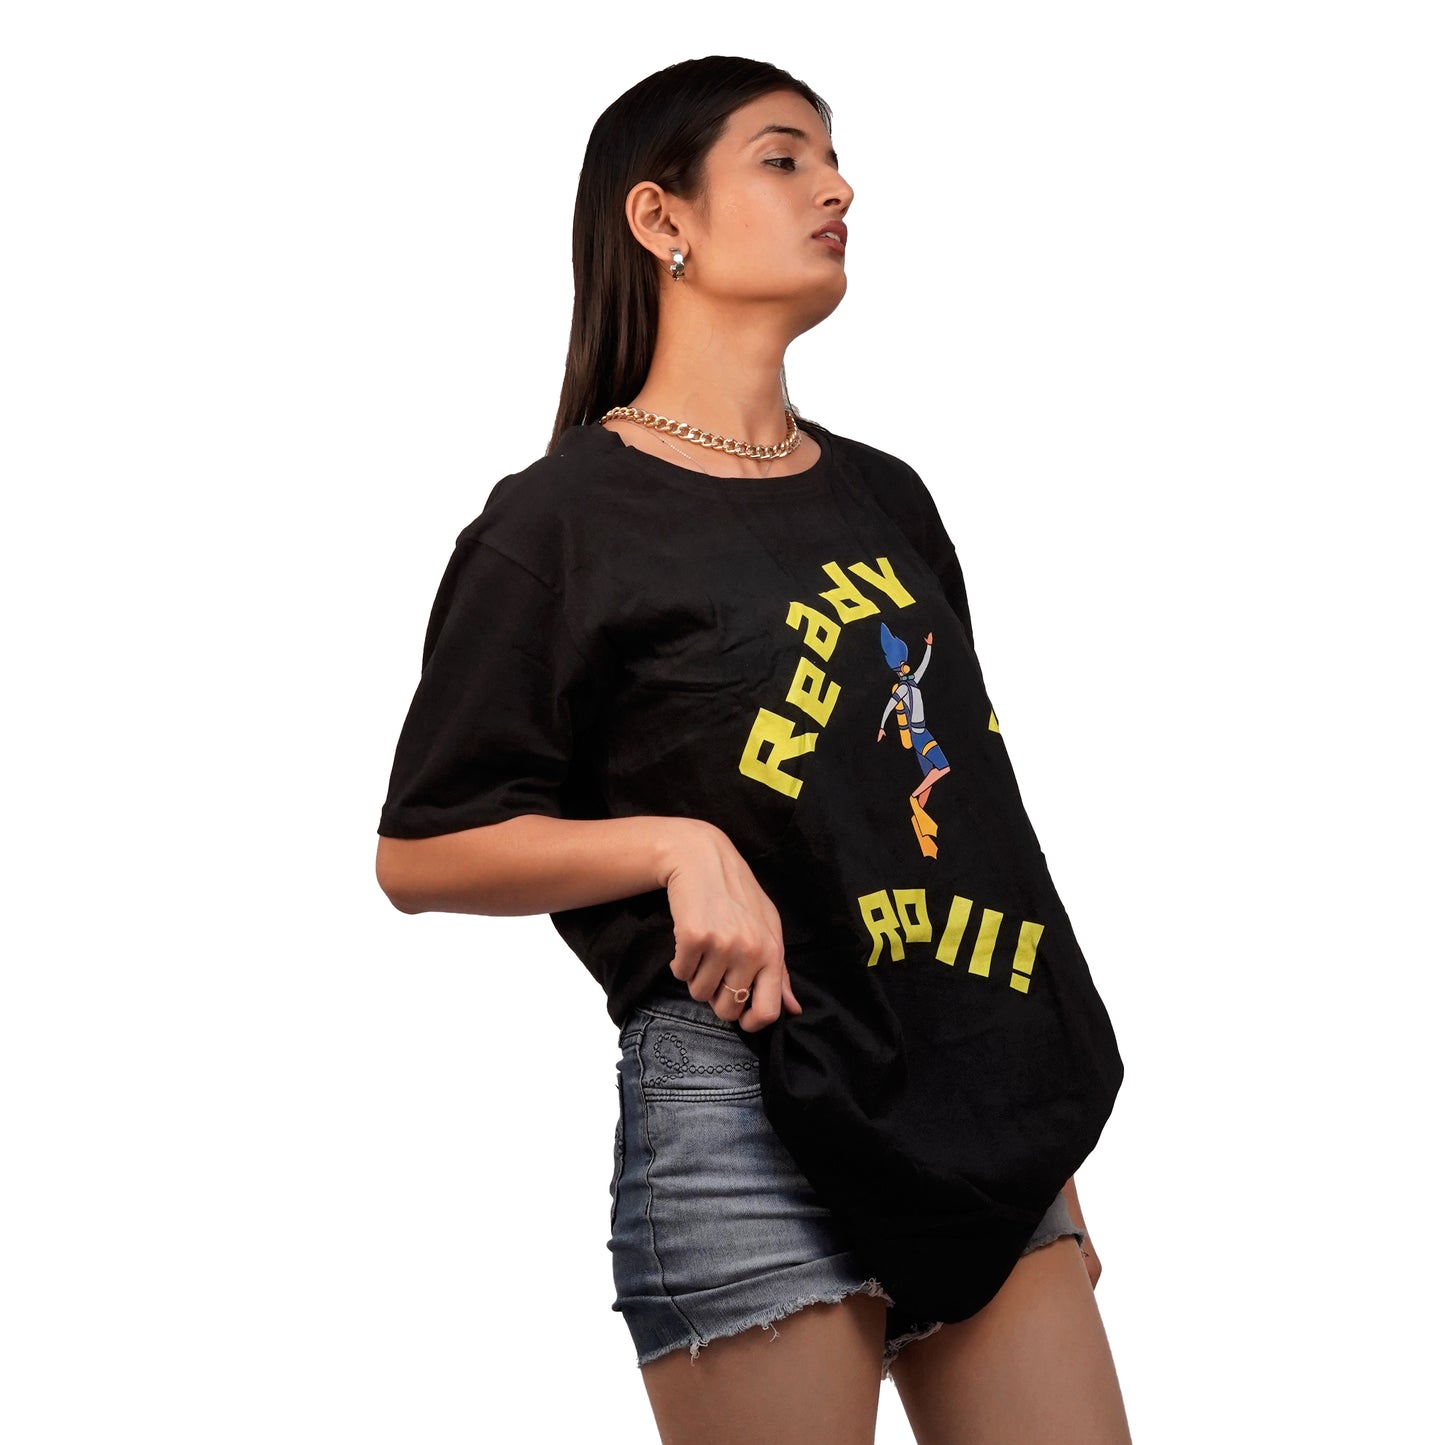 Ready To Roll T-Shirt In Black Color For Women